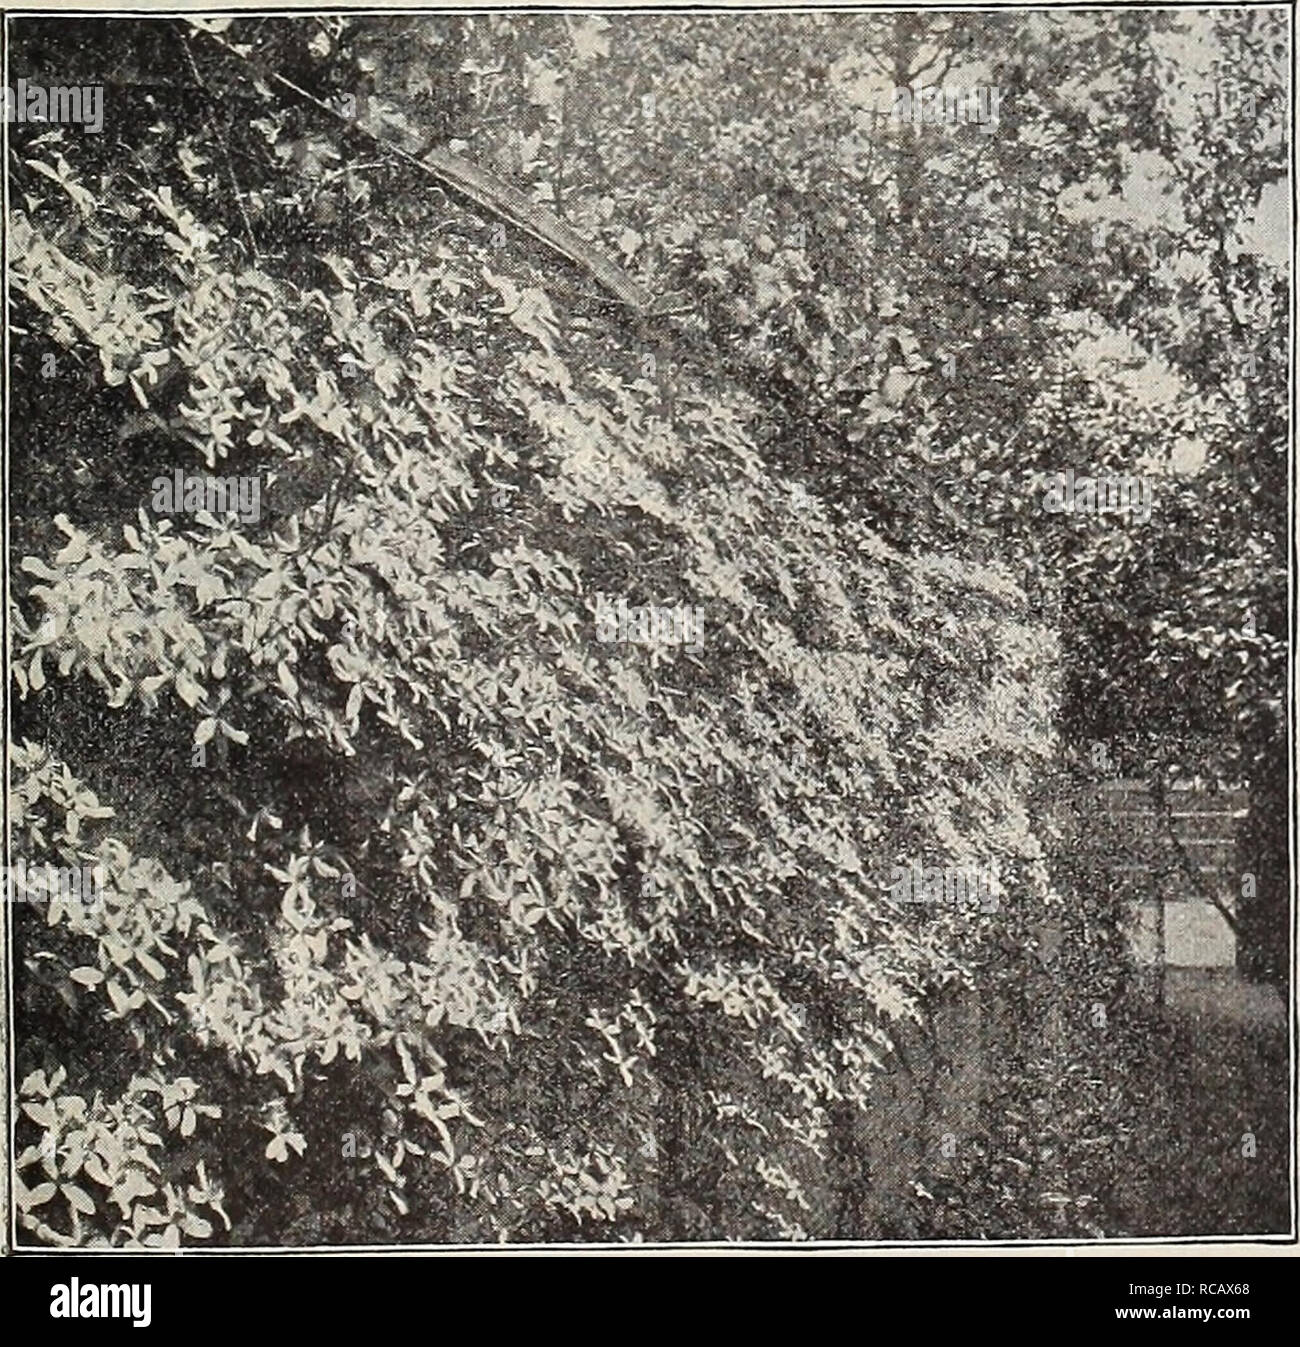 . Dreer's garden book : seventy-third annual edition 1911. Seeds Catalogs; Nursery stock Catalogs; Gardening Equipment and supplies Catalogs; Flowers Seeds Catalogs; Vegetables Seeds Catalogs; Fruit Seeds Catalogs. &quot;flHlBfADRBR -PHILADfLPHIA 4&gt;A 'W HARDY CLIMBING PLANTS:. 0 259 Jl^New Early Spring=flowering Clematis Montana Grandiflora. Of stronger growth than any other Clematis, and succeeds under the most adverse conditions, and is perfectly hardy. Its flowers, which resemble the Anemone or Windflower, are snow-white, li to 2 inches in diameter, and frequently begin to expand as earl Stock Photo